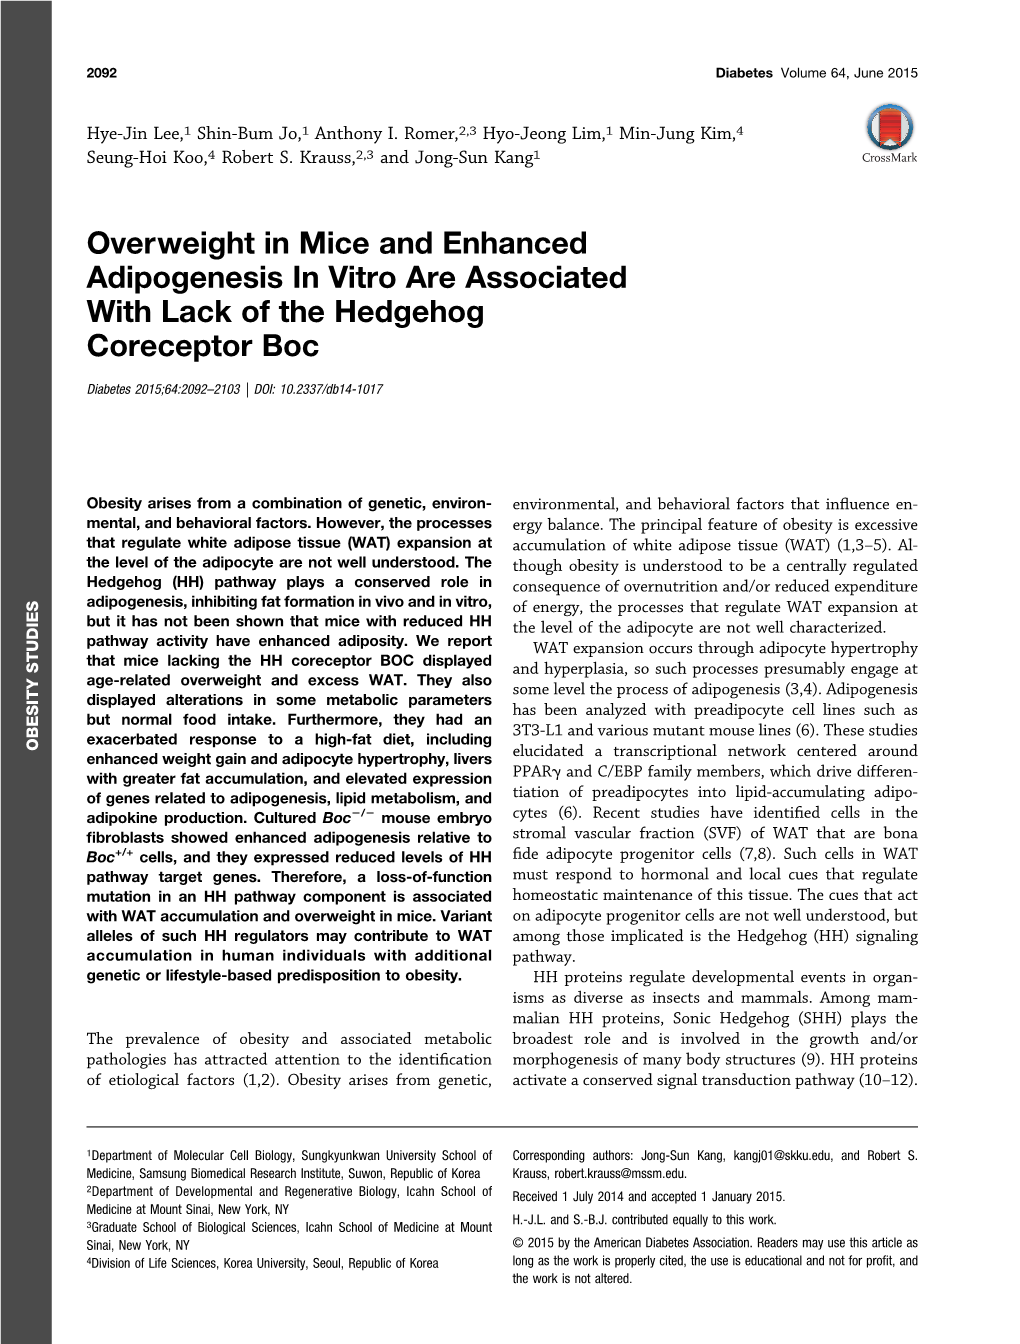 Overweight in Mice and Enhanced Adipogenesis in Vitro Are Associated with Lack of the Hedgehog Coreceptor Boc